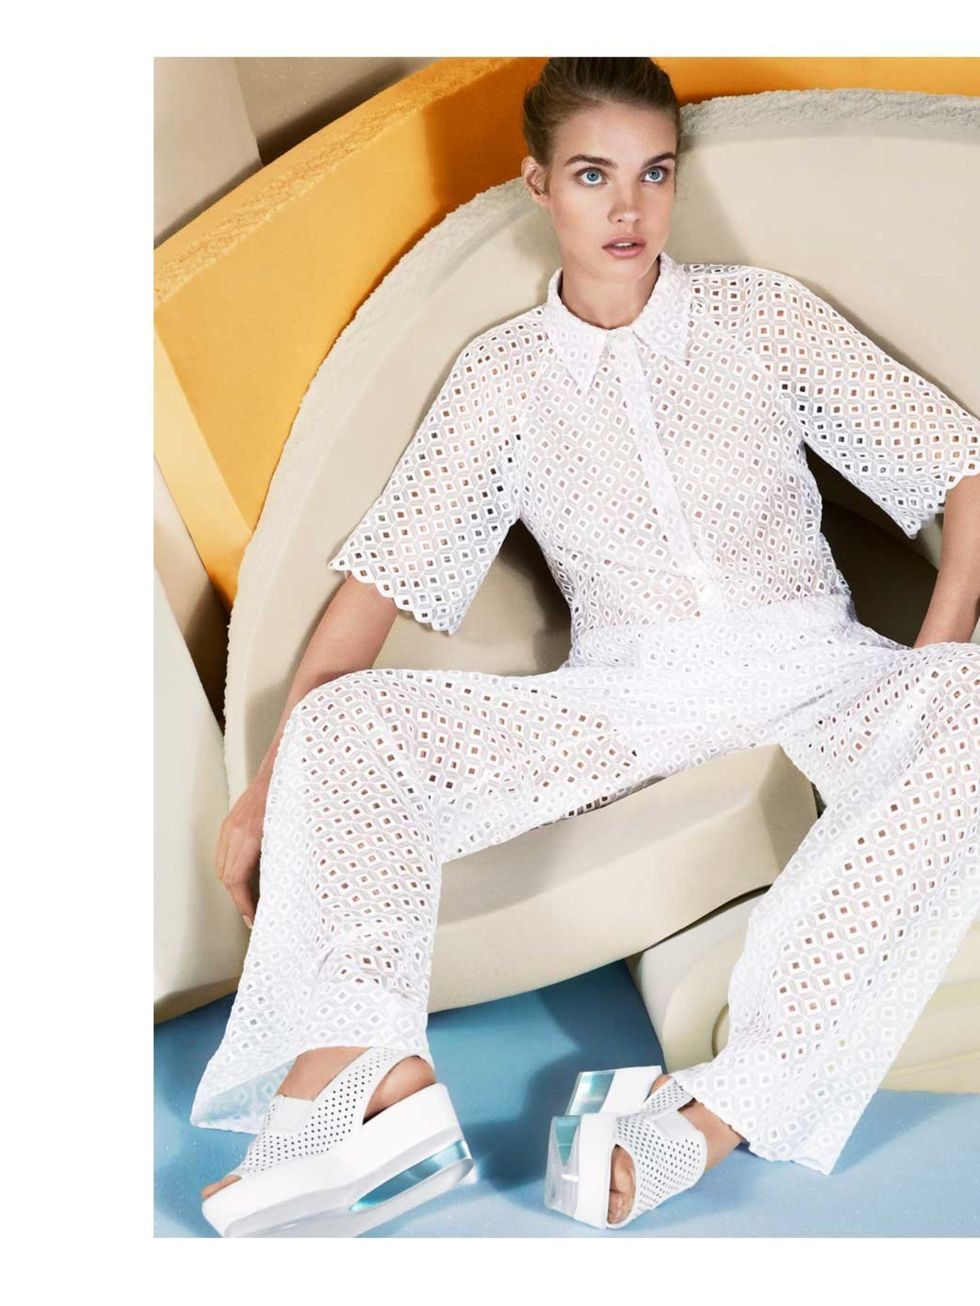 <p>Natalia Vodianova for Stella McCartney summer 2013 ad campaign. It's no wonder she's known as Natalia Supernova, she rocks this ad to the max. The angles, the clean lines, the muted tones  it's minimal perfection.</p>